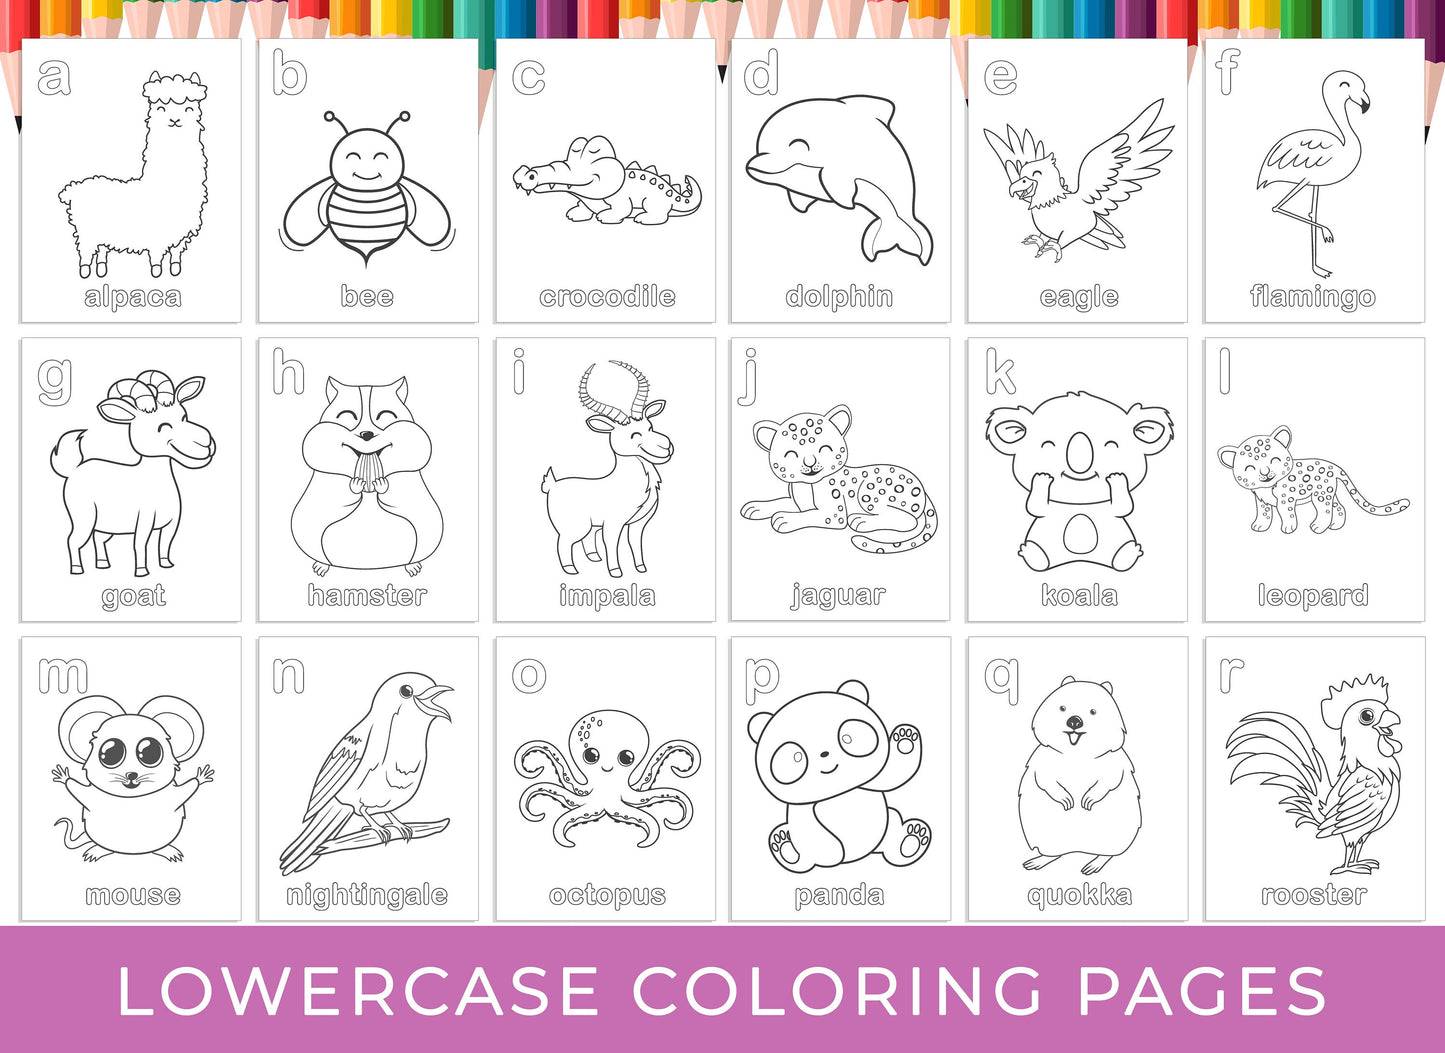 Alphabet Coloring Pages - 52 Printable Animal Alphabet Coloring Pages for Kids, Boys, Girls and Baby, Upper Case and Lower Case Letters A-Z.